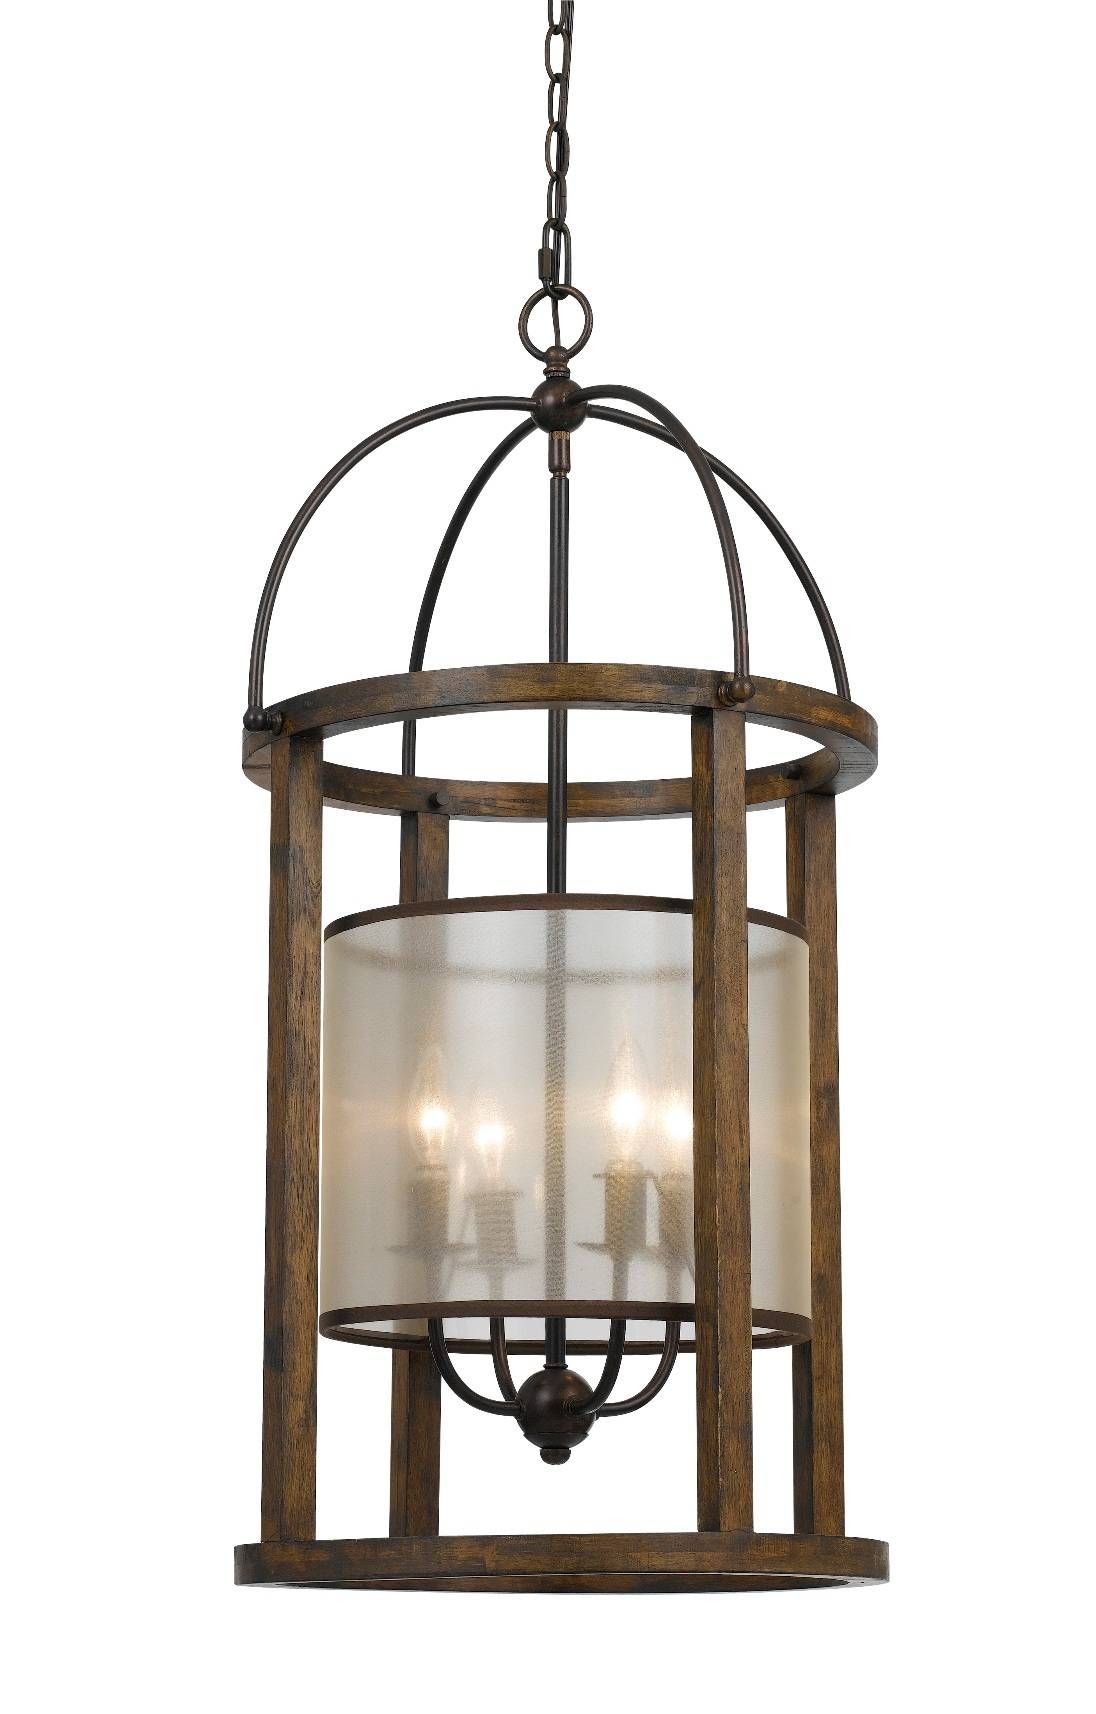 Iron & Wood Sheer Shade Chandelier 16" | Lamp Shade Pro With Regard To Arts And Crafts Pendant Lighting (View 12 of 15)